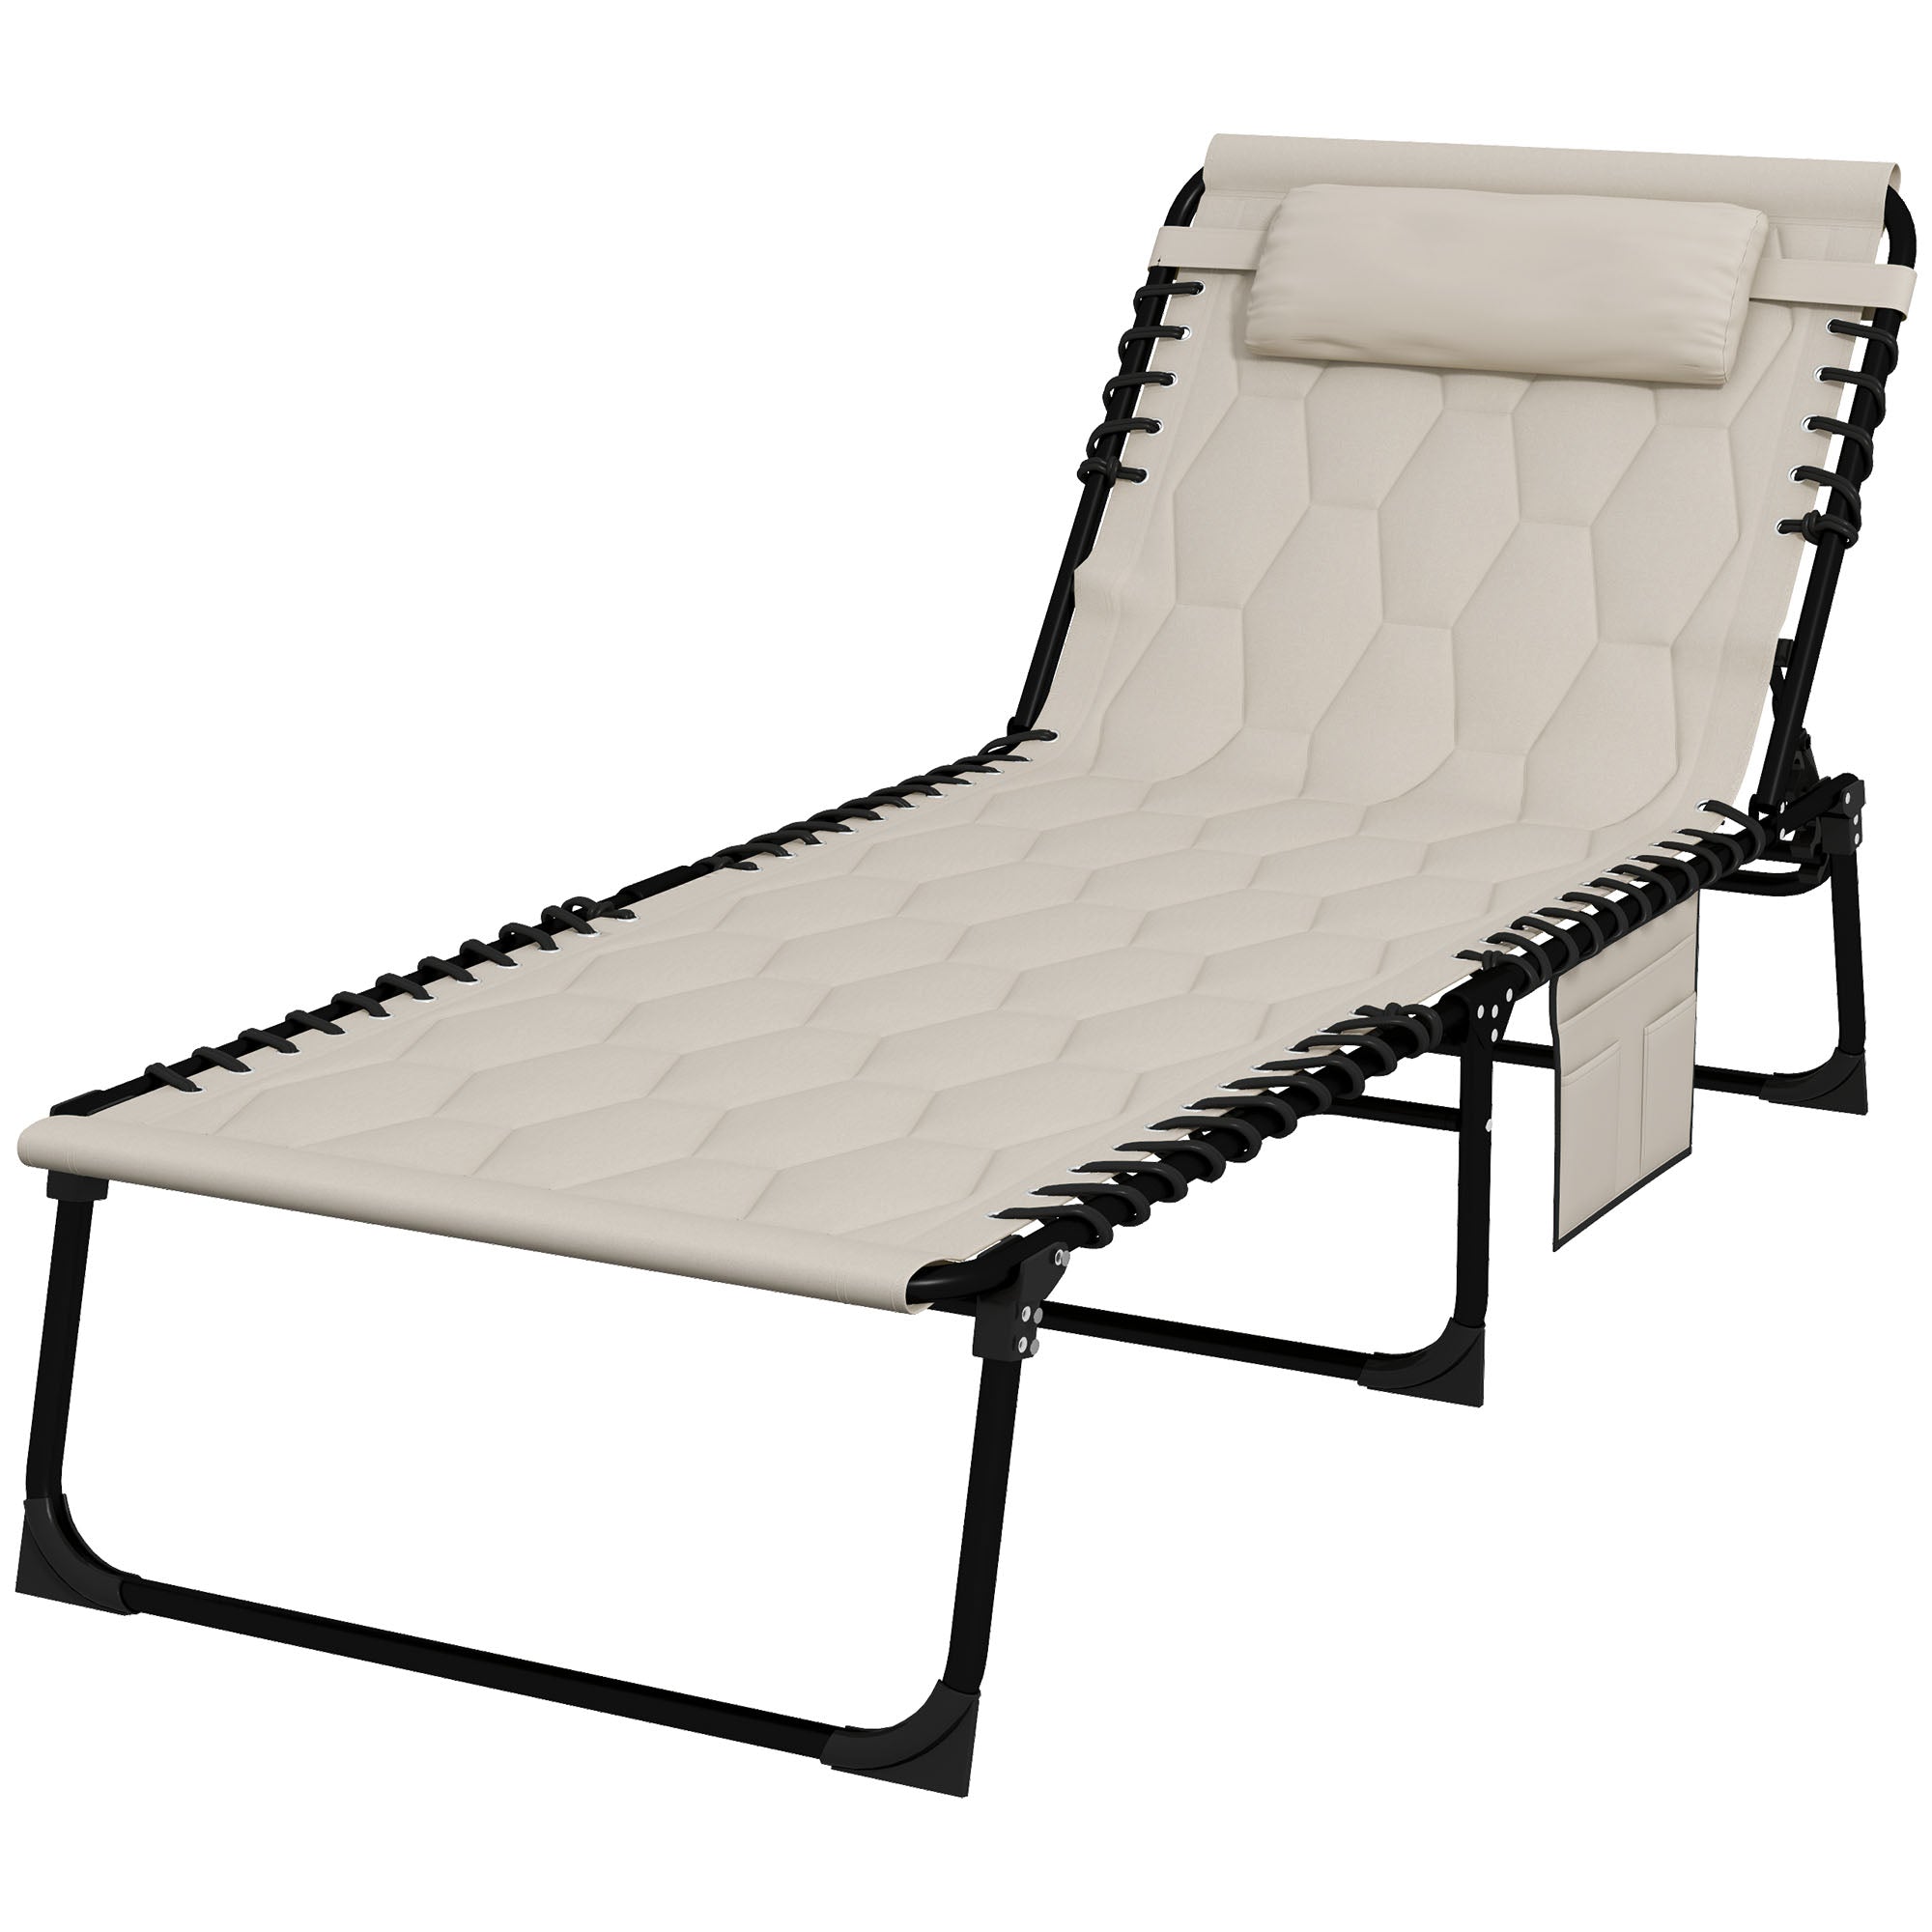 Foldable Sun Lounger Set with 5-level Reclining Back, Outdoor Tanning Chairs Sun Loungers with Build-in Padded Seat, Side Pocket, Headrest for Beach, Yard, Patio, Khaki-0